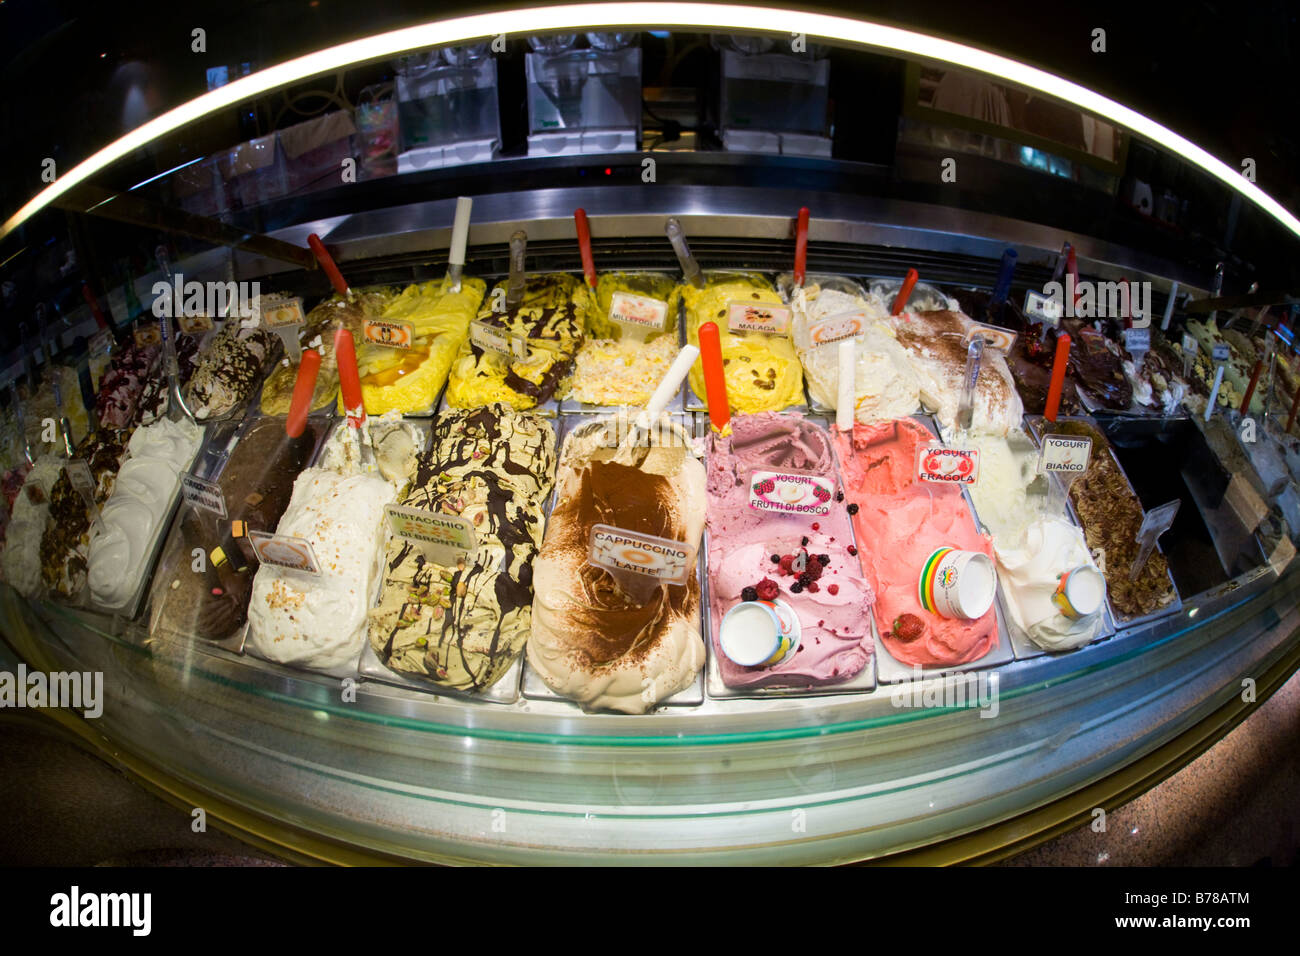 Gelato on sale at a gelateria in Rome, Italy Stock Photo